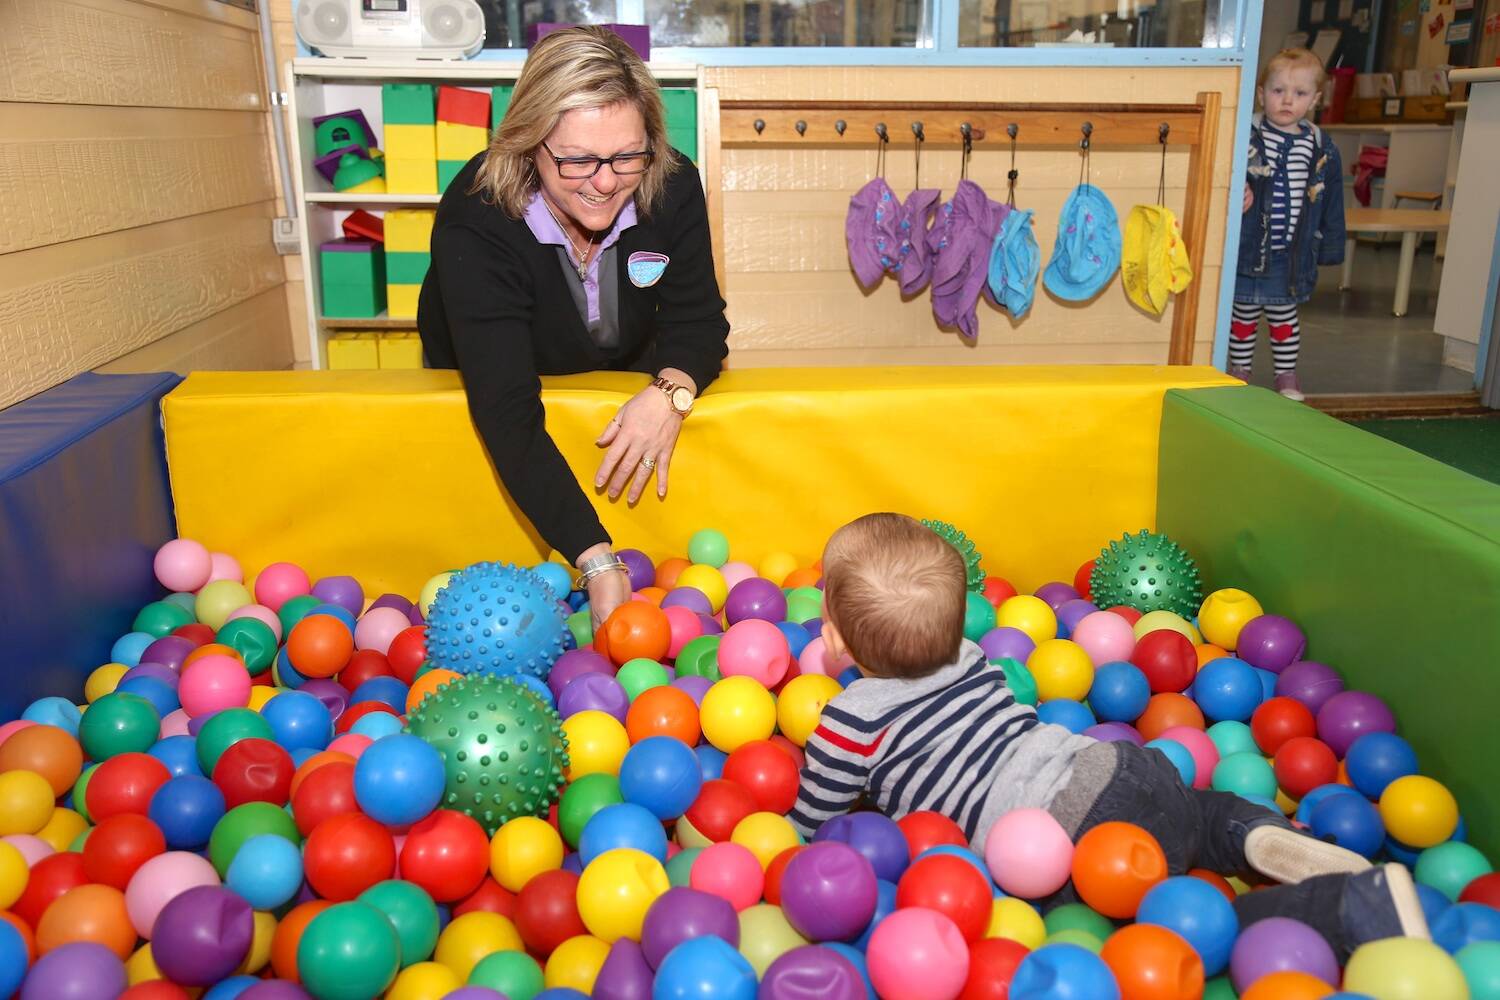 Goodstart Early Learning Wagga Wagga - Station Place